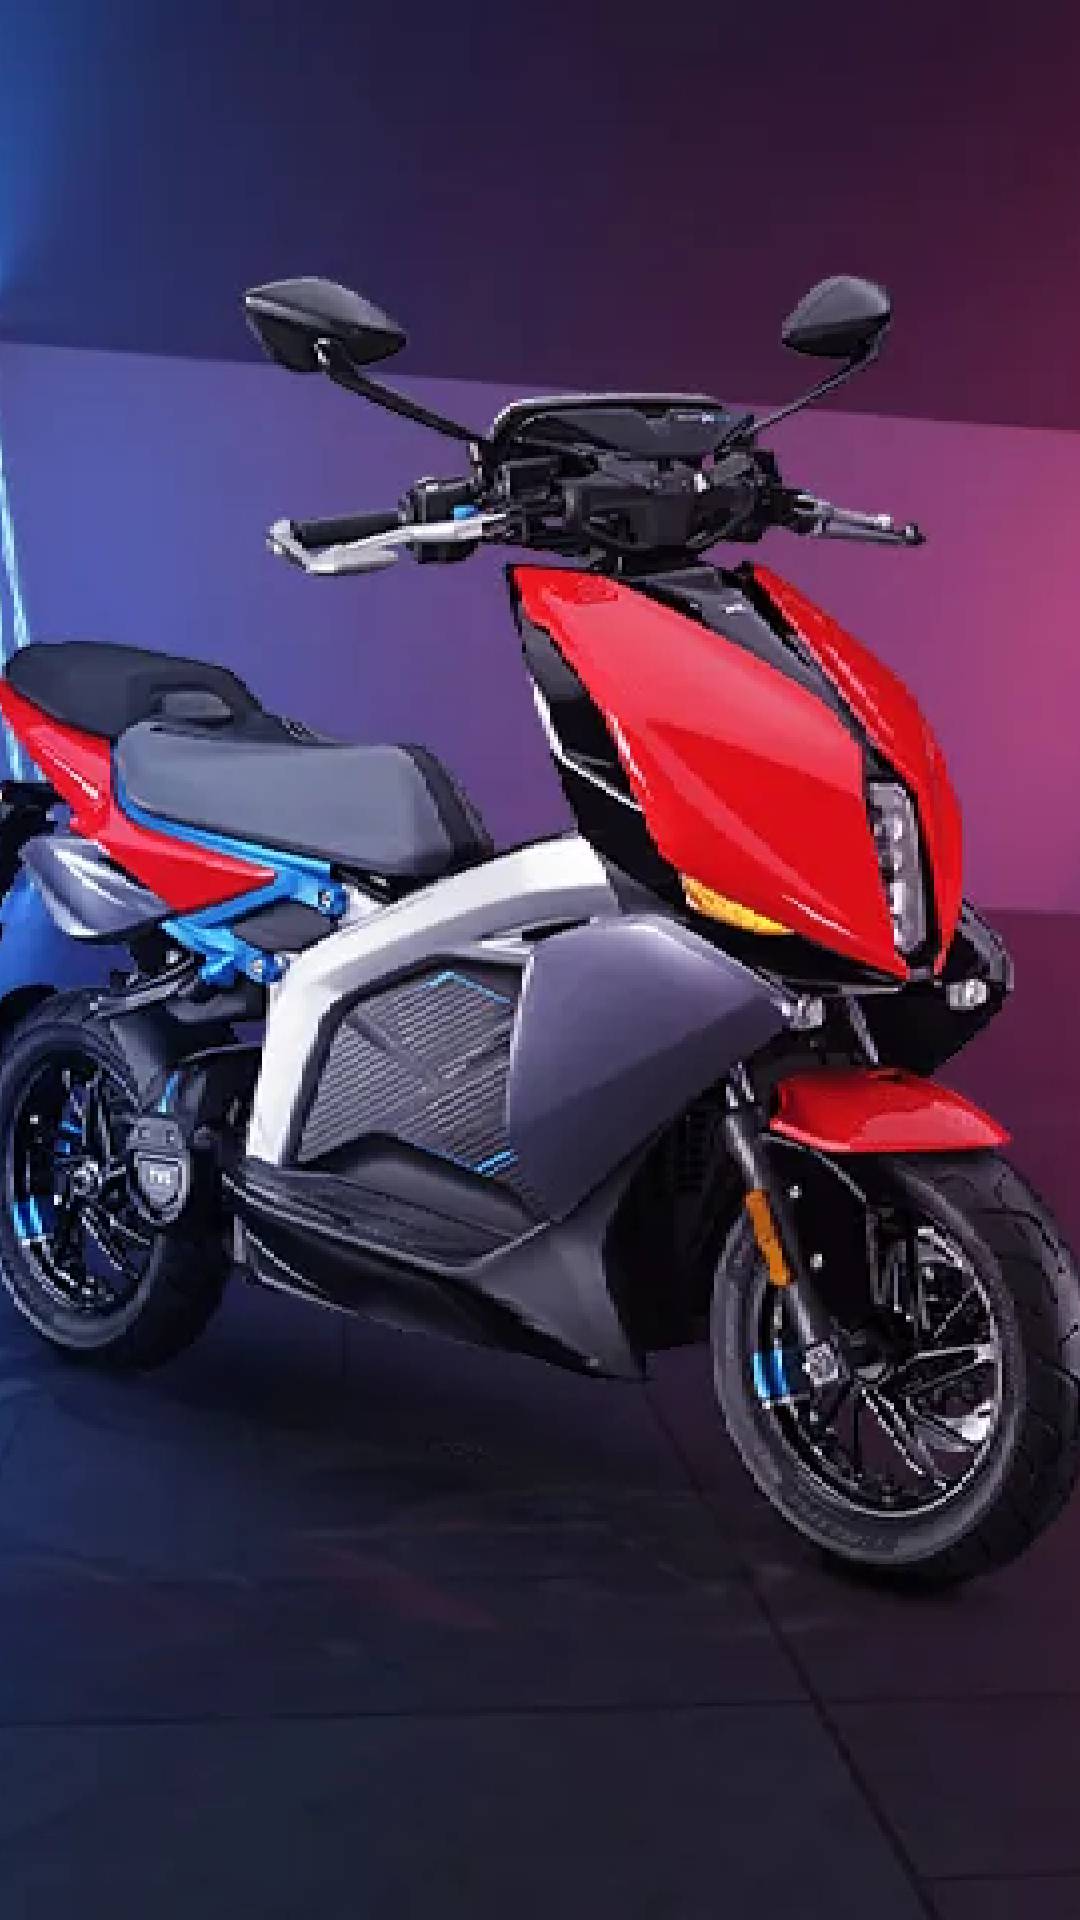 Top 10 scooters you can buy in India under Rs 1 lakh
